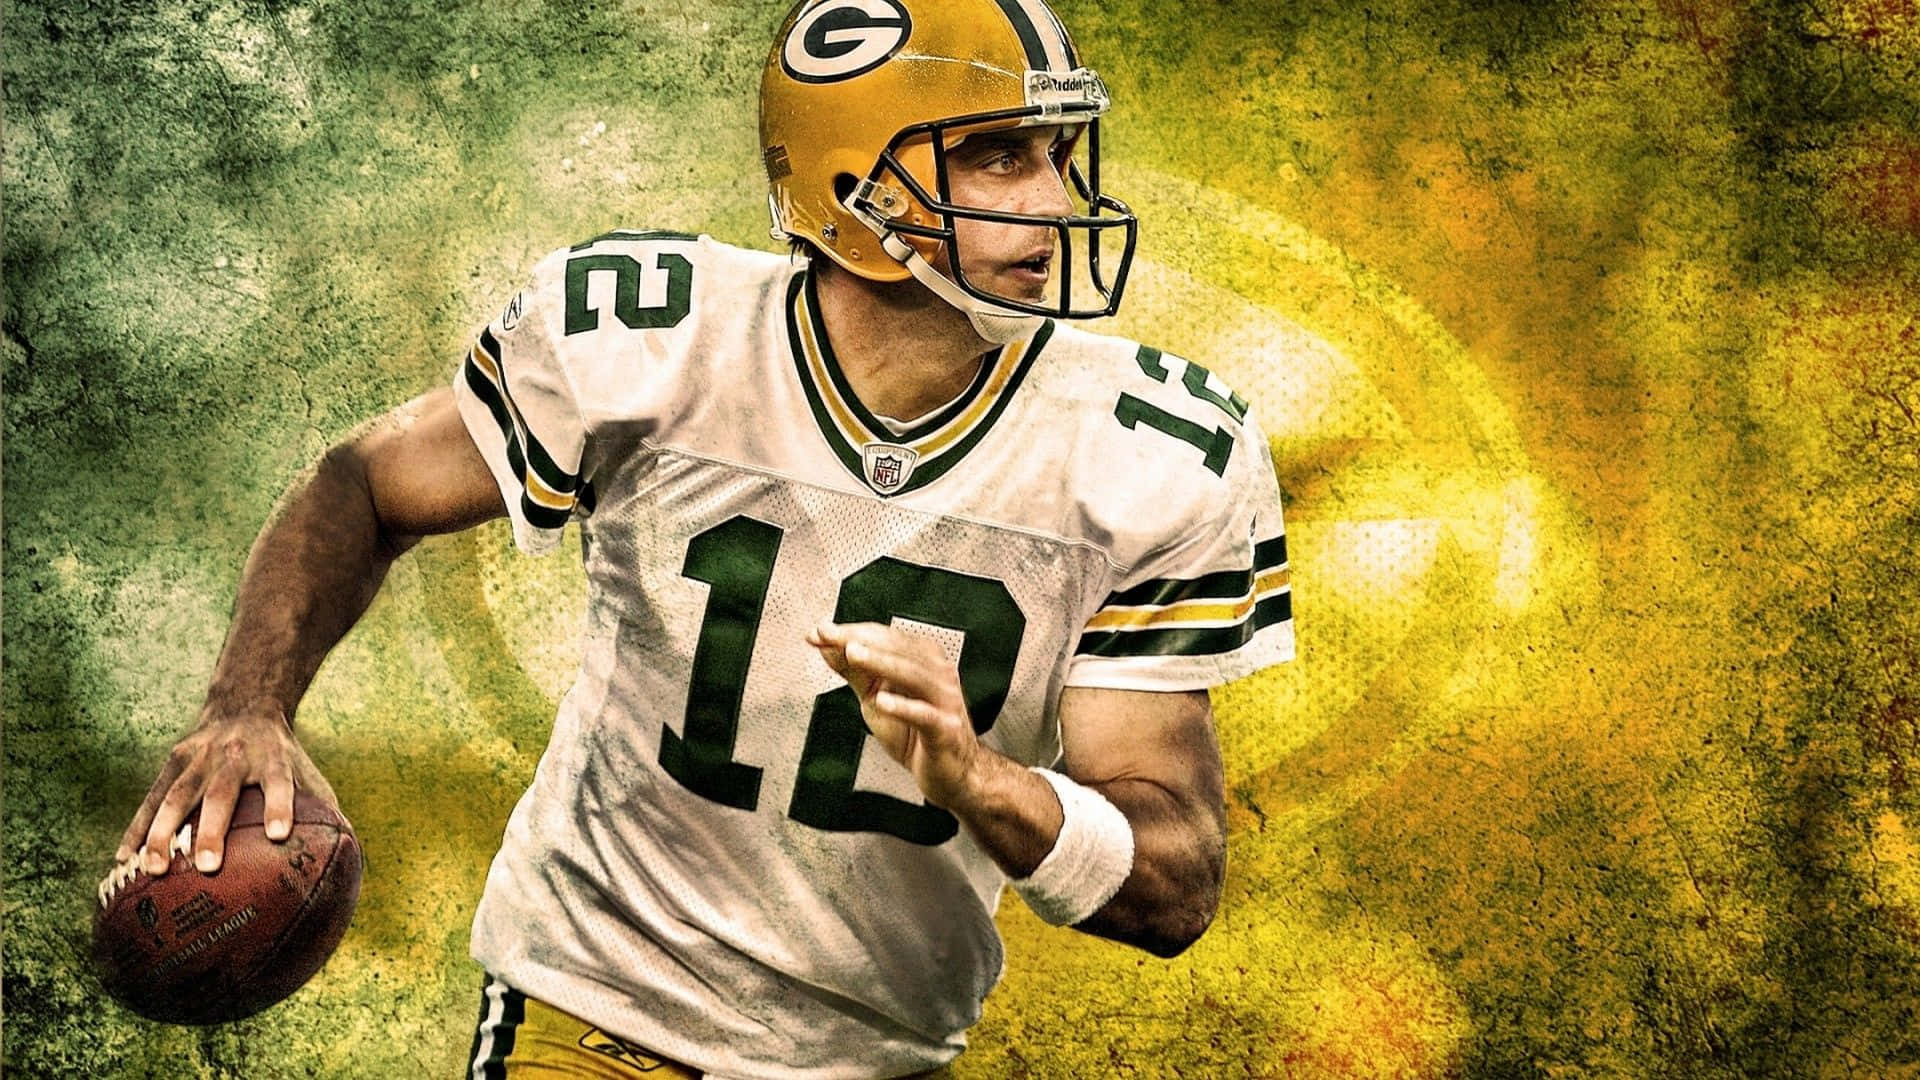 Aaron Rodgers, the two-time NFL MVP